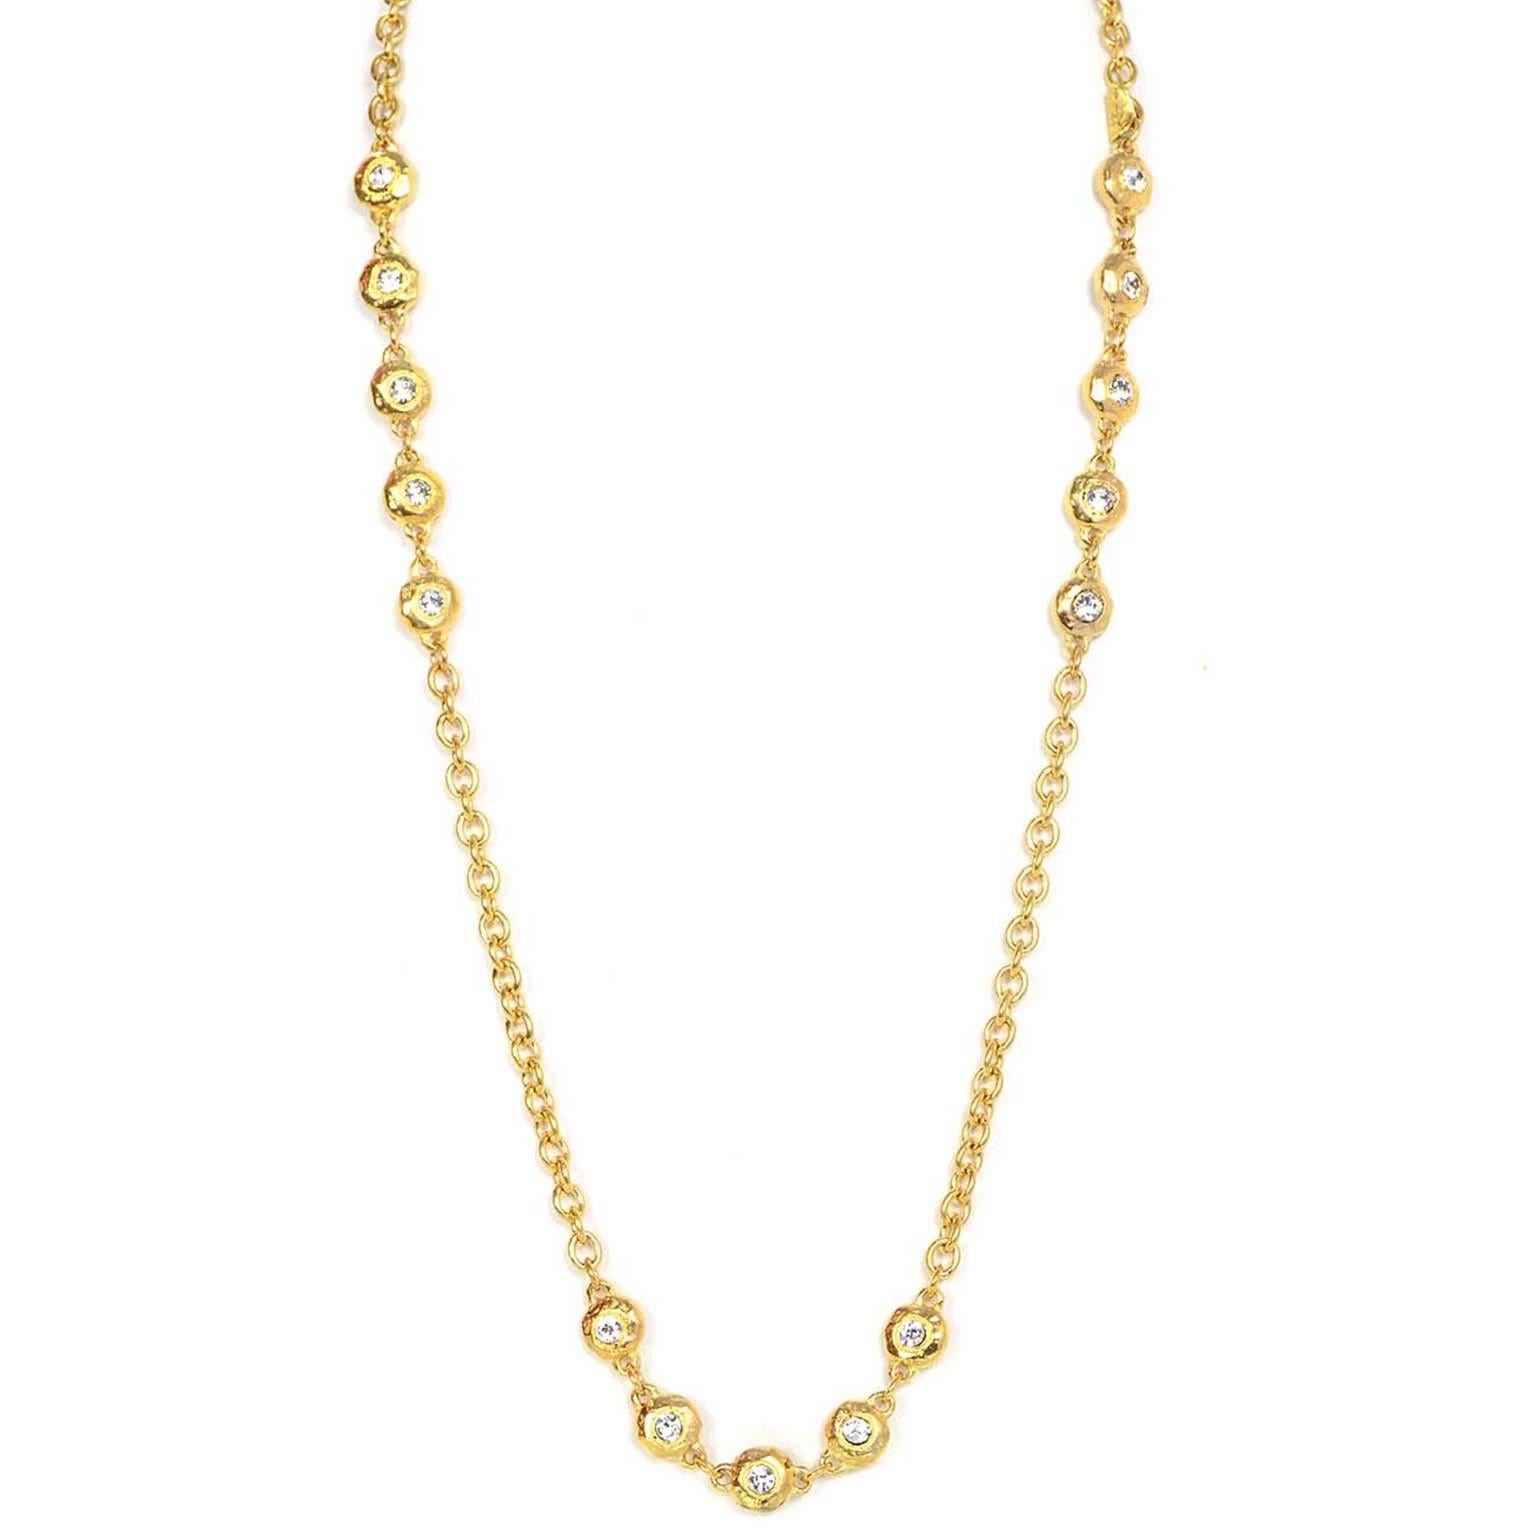 Chanel Vintage '70s/'80s 36" Chain-link Crystal Necklace